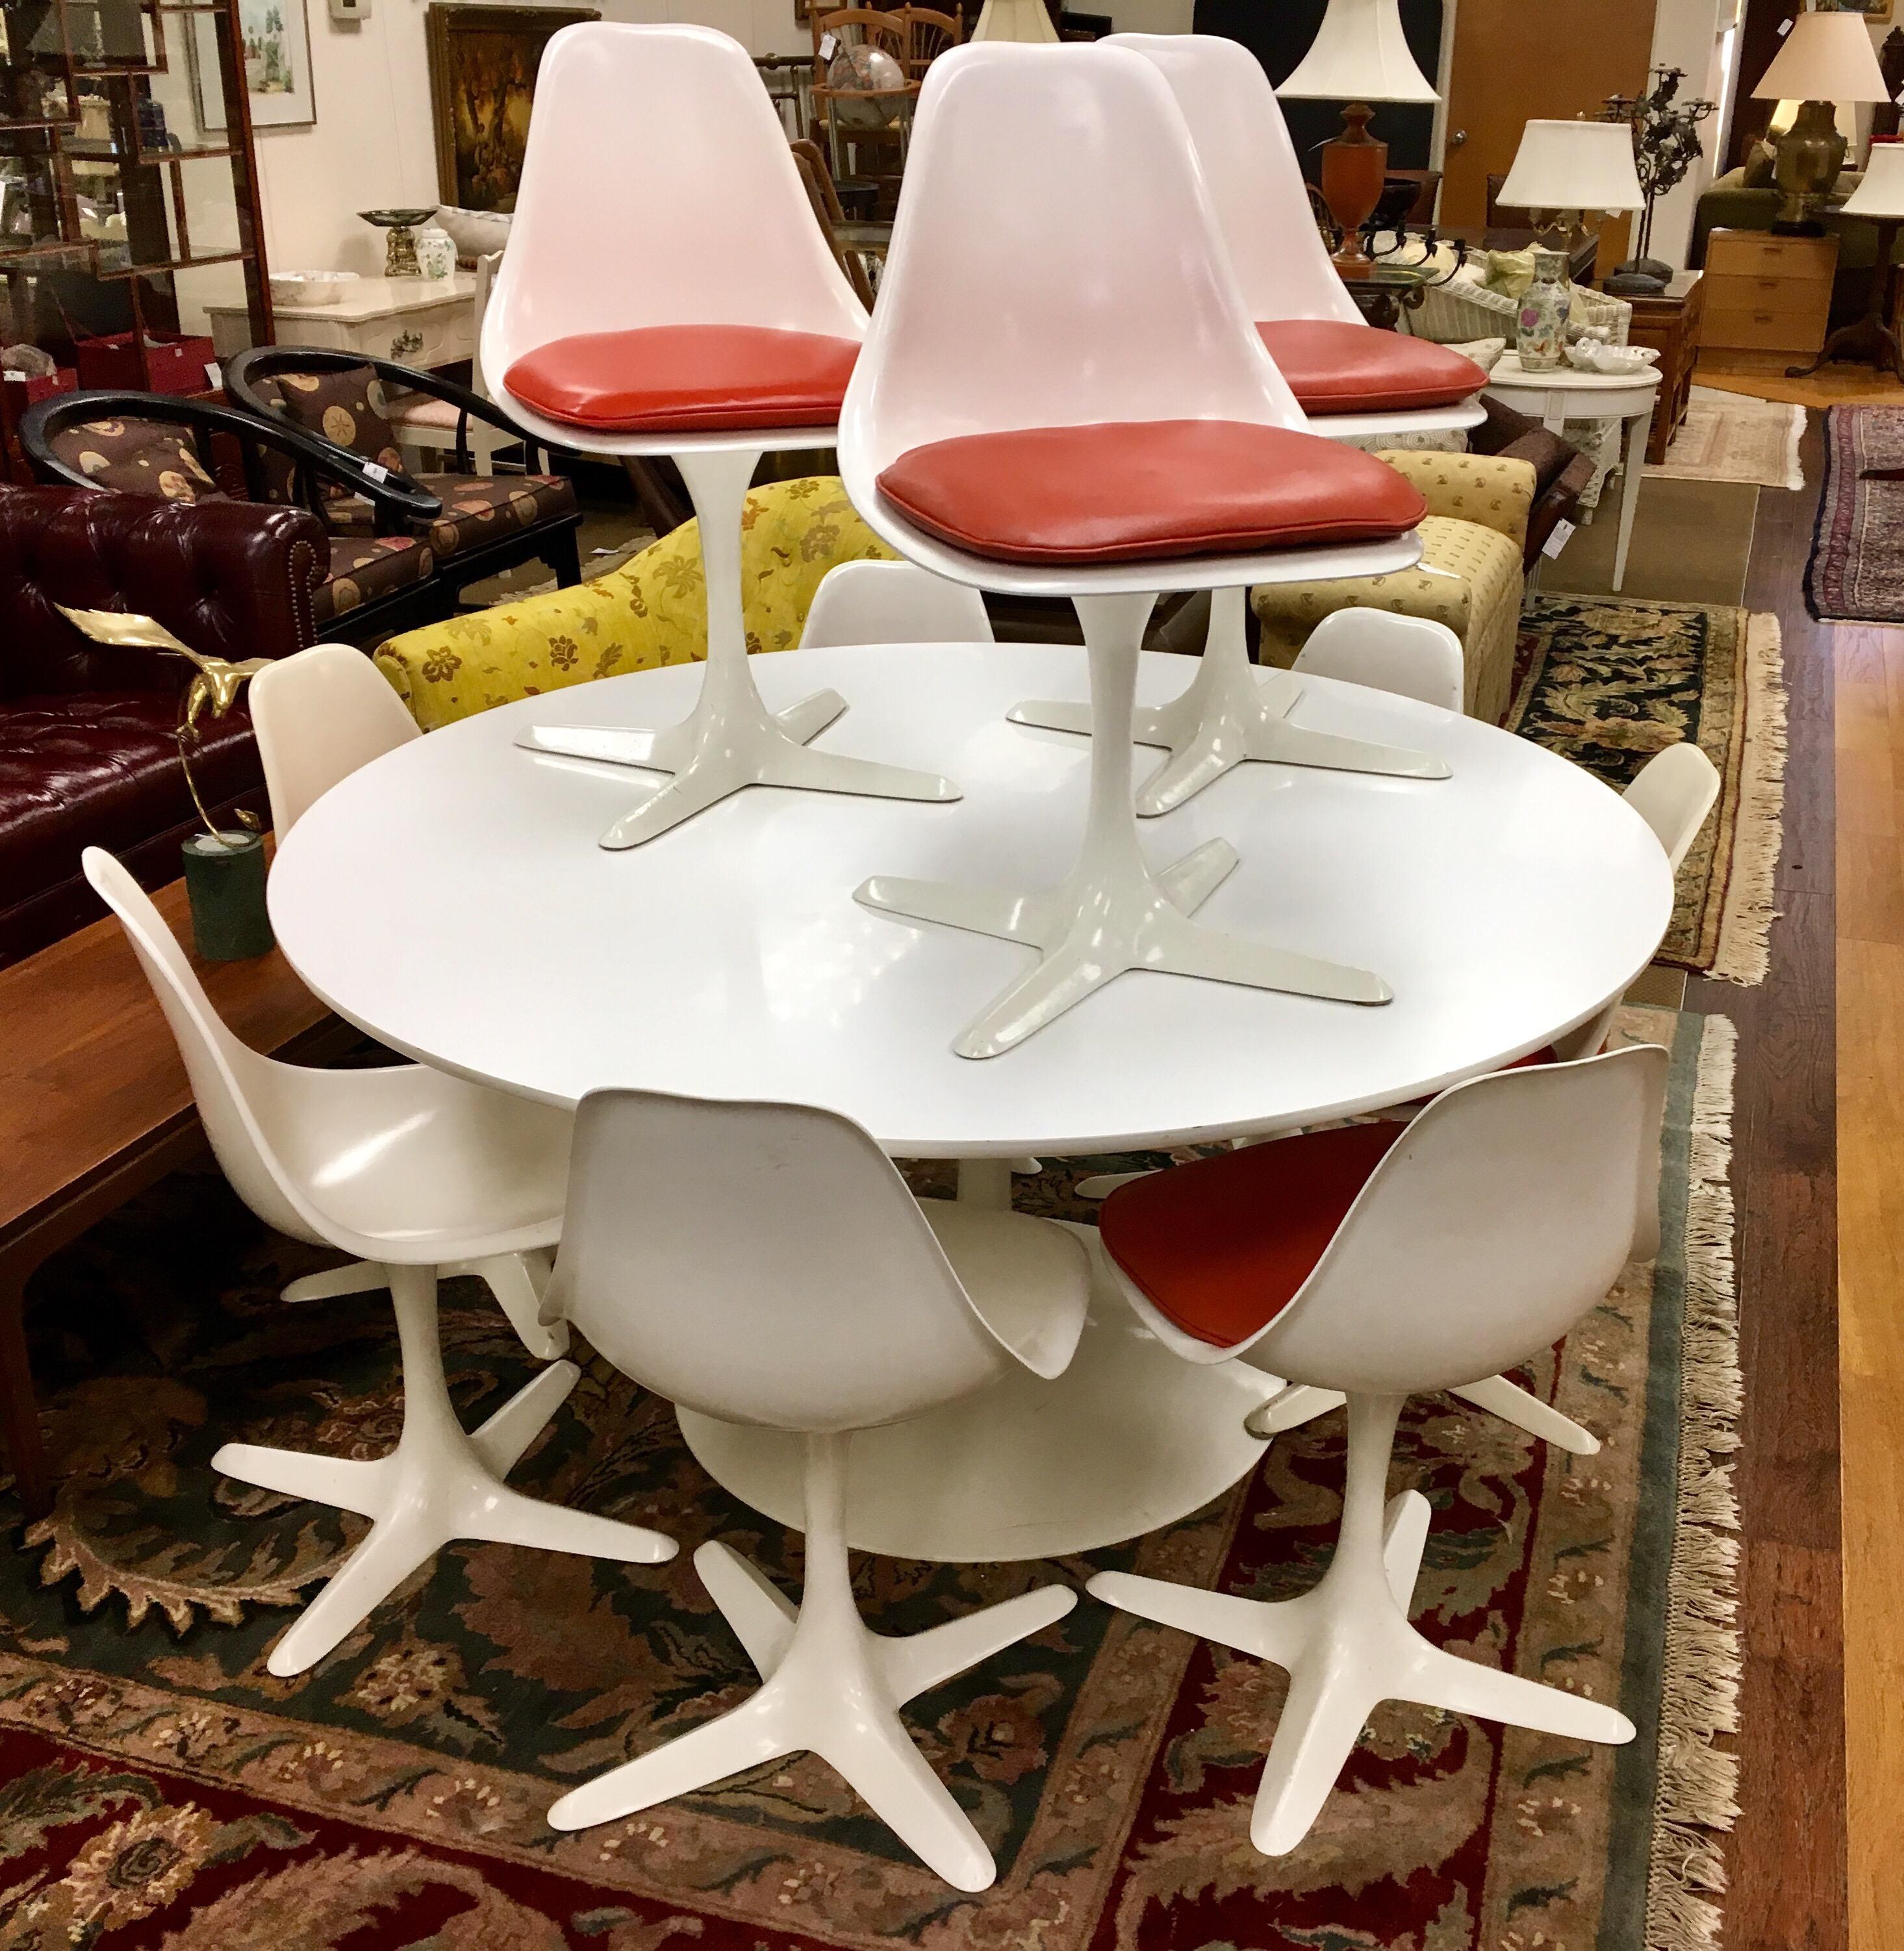 True period tulip set from famed vintage USA maker Burke Industries that features a five foot round tulip table and ten matching chairs. Eight of the ten chairs have a custom reddish orange seat cushions, the other two do not.